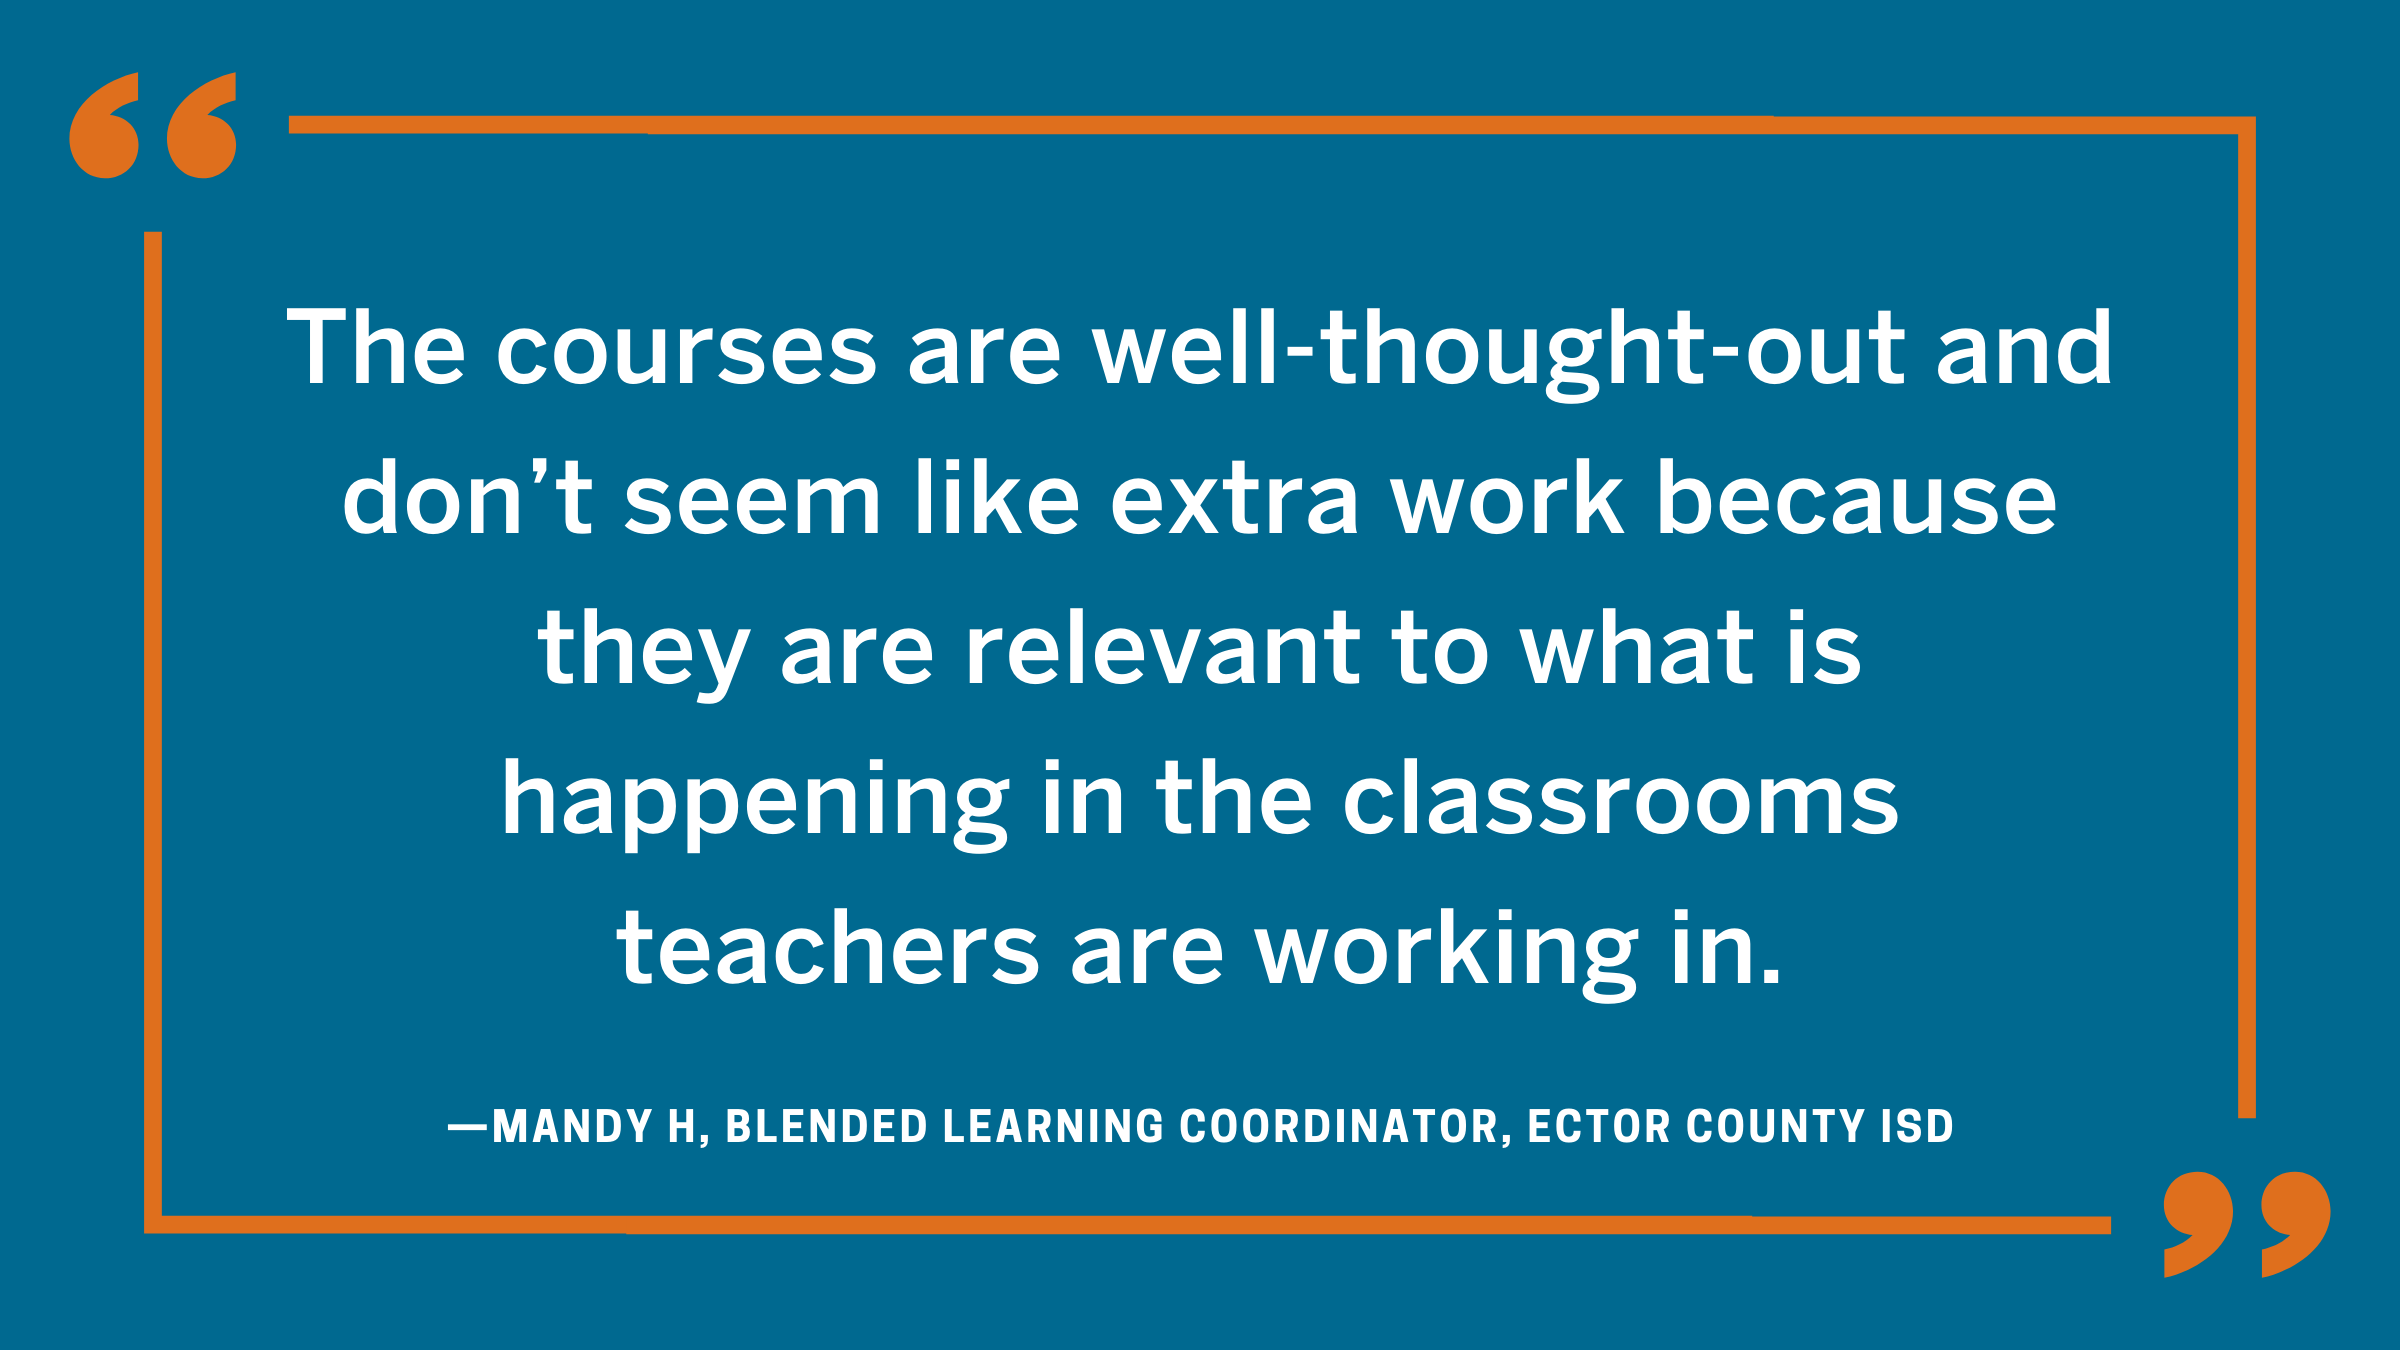 Implementing Project-Based Instruction and Blended Learning